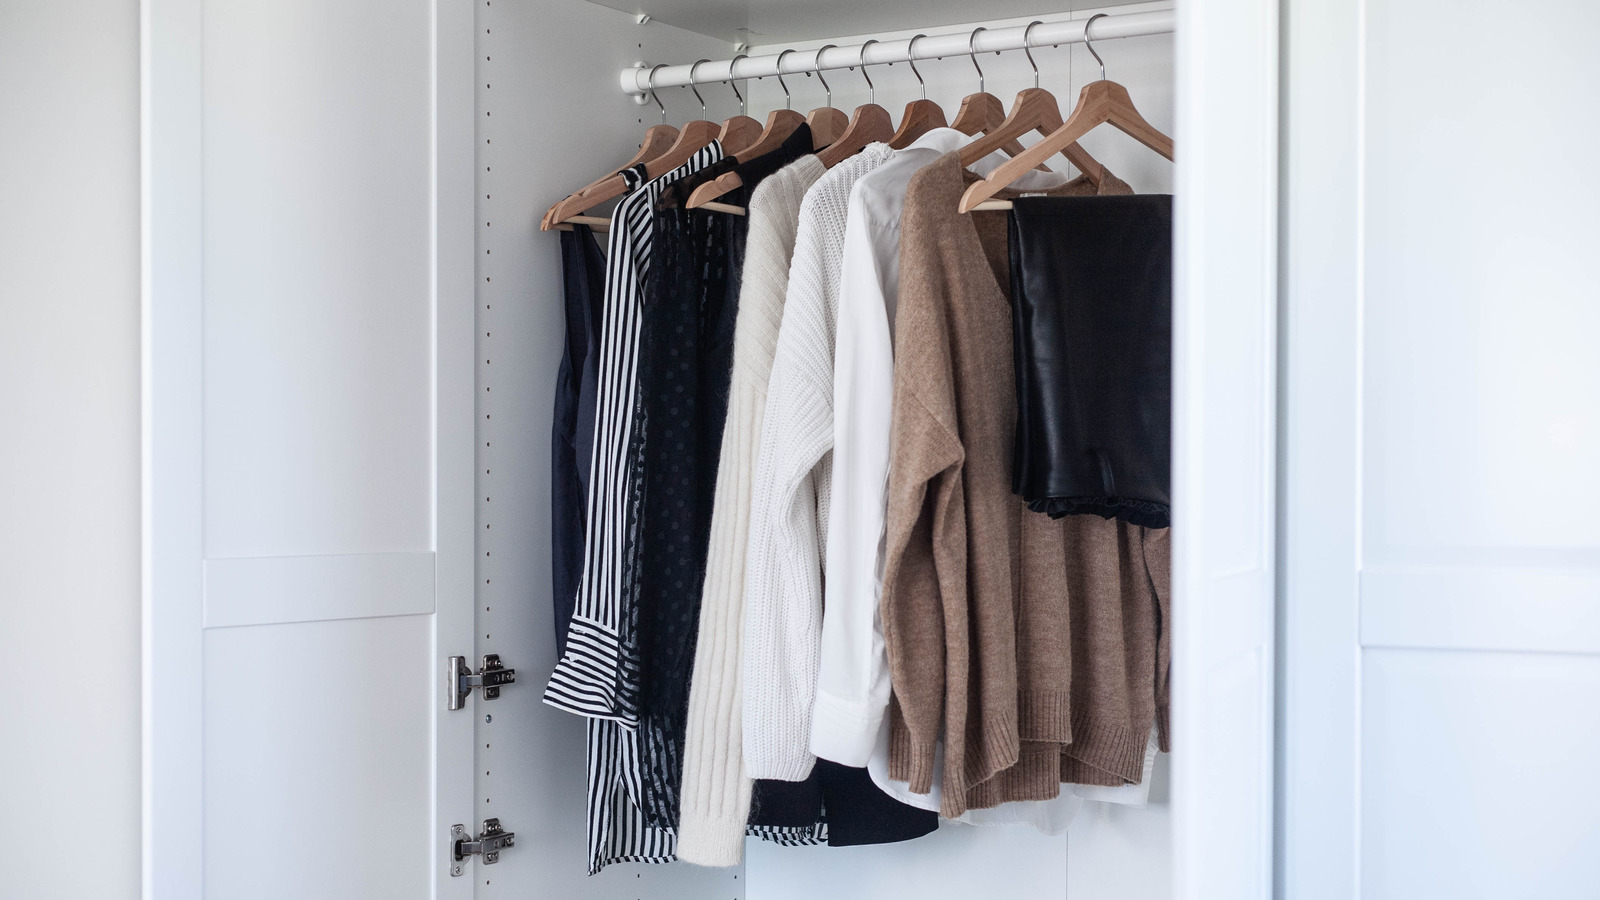 https://www.housedigest.com/img/gallery/5-tips-for-keeping-your-closet-smelling-fresh/l-intro-1667414368.jpg